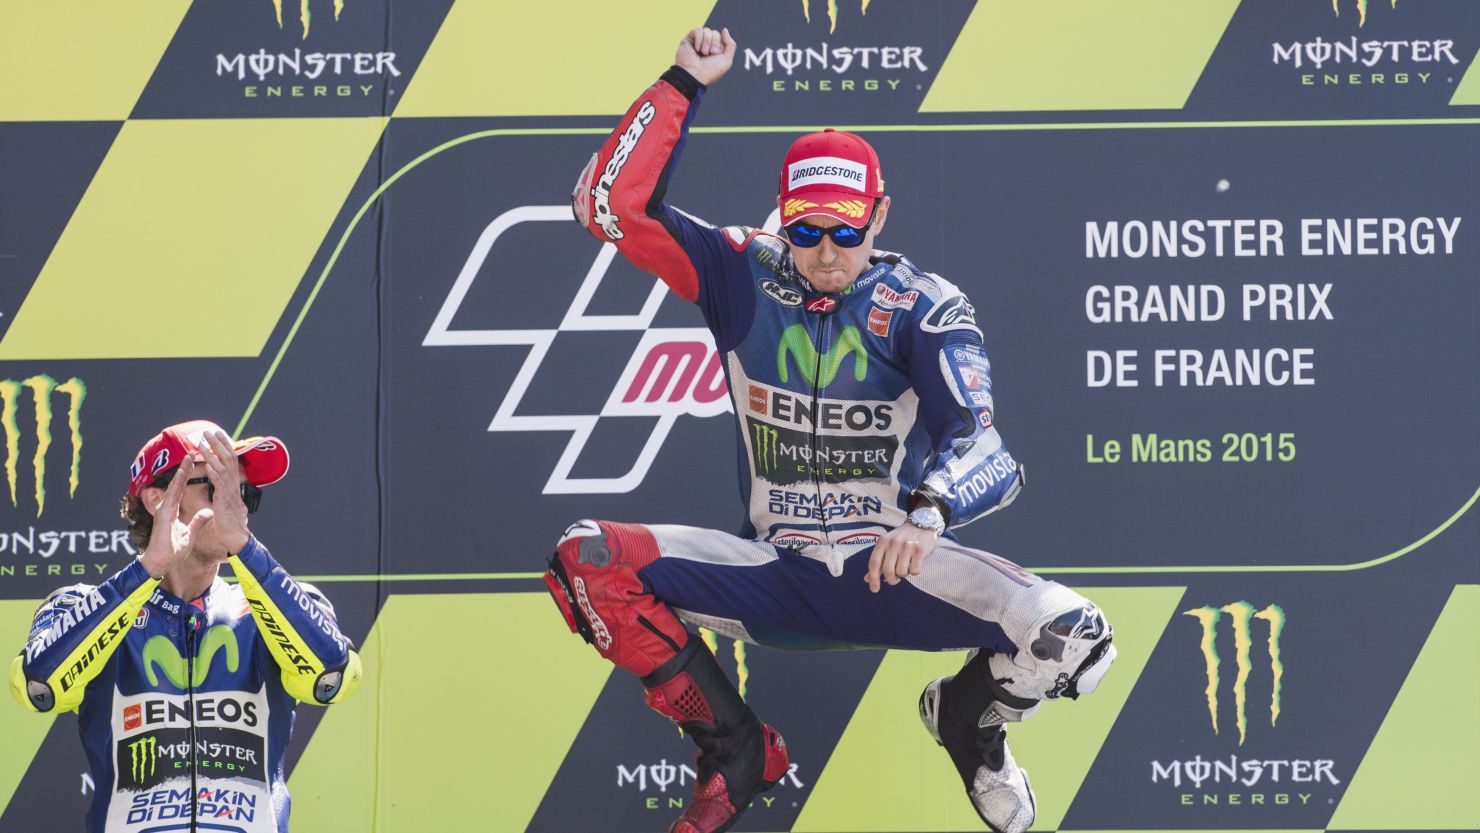 Jorge Lorenzo jumps to celebrate victory on the podium at the MotoGp of France.